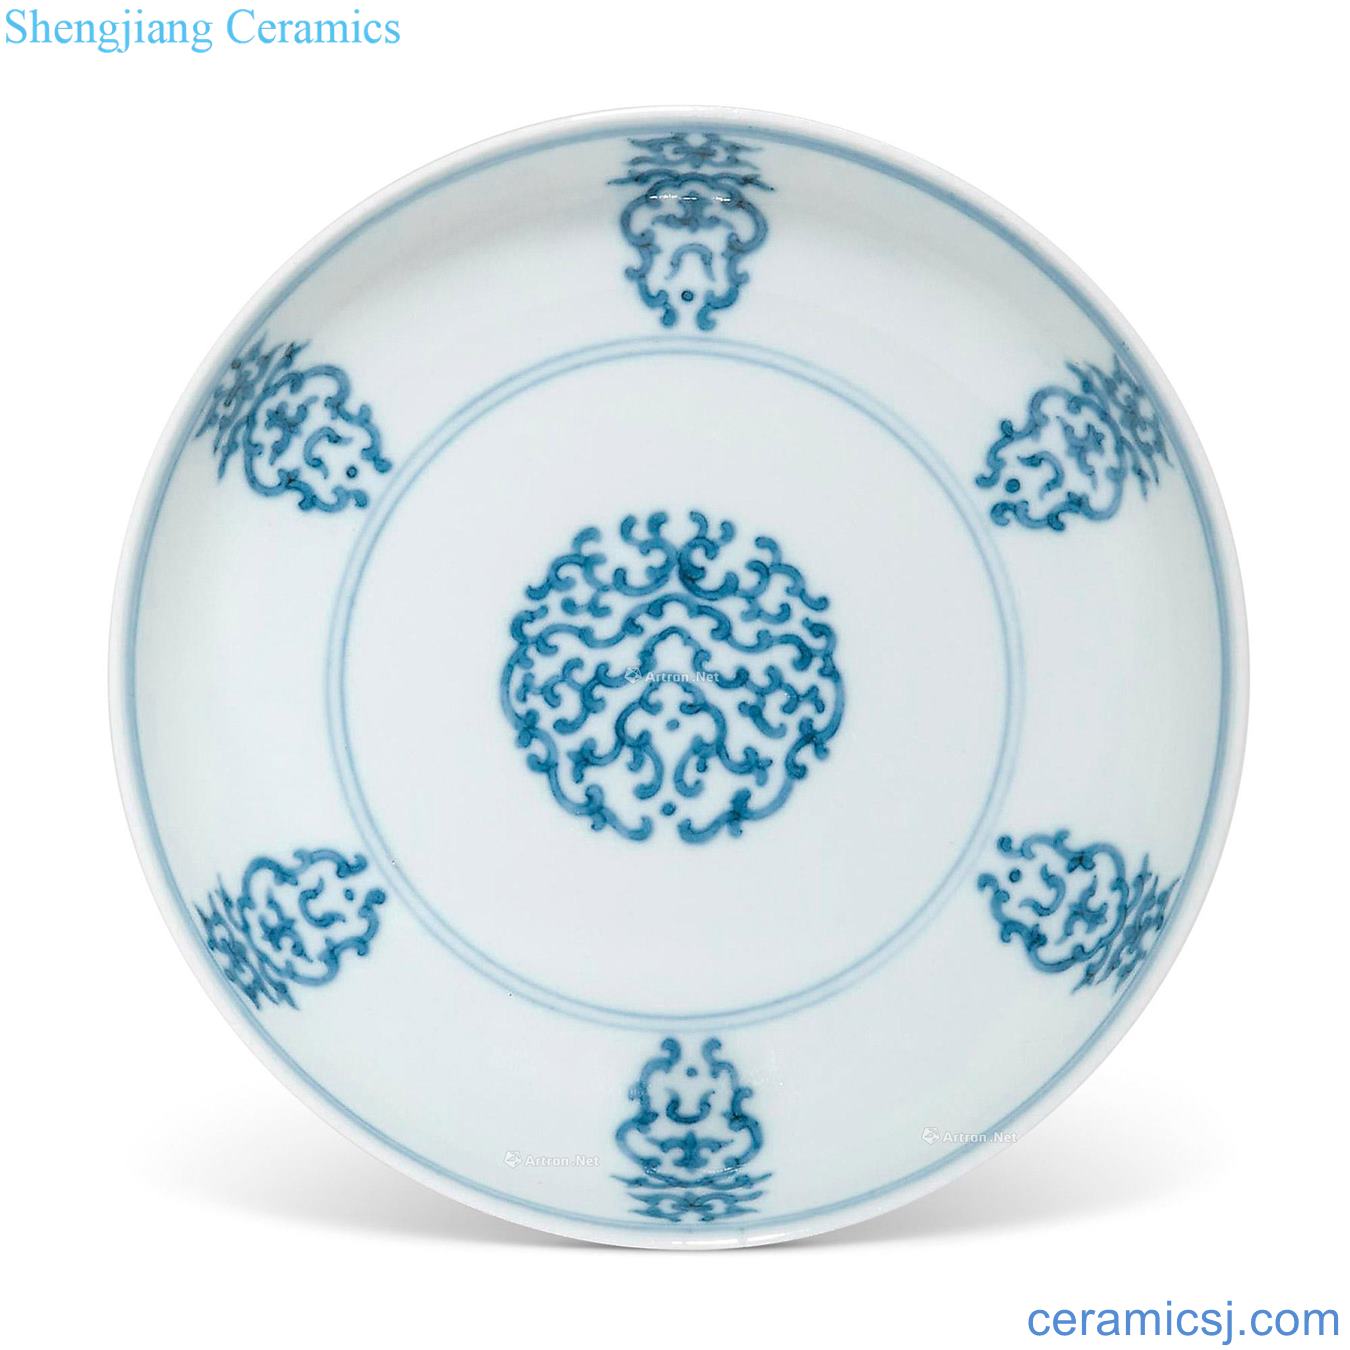 Qing daoguang Blue and white life of tray